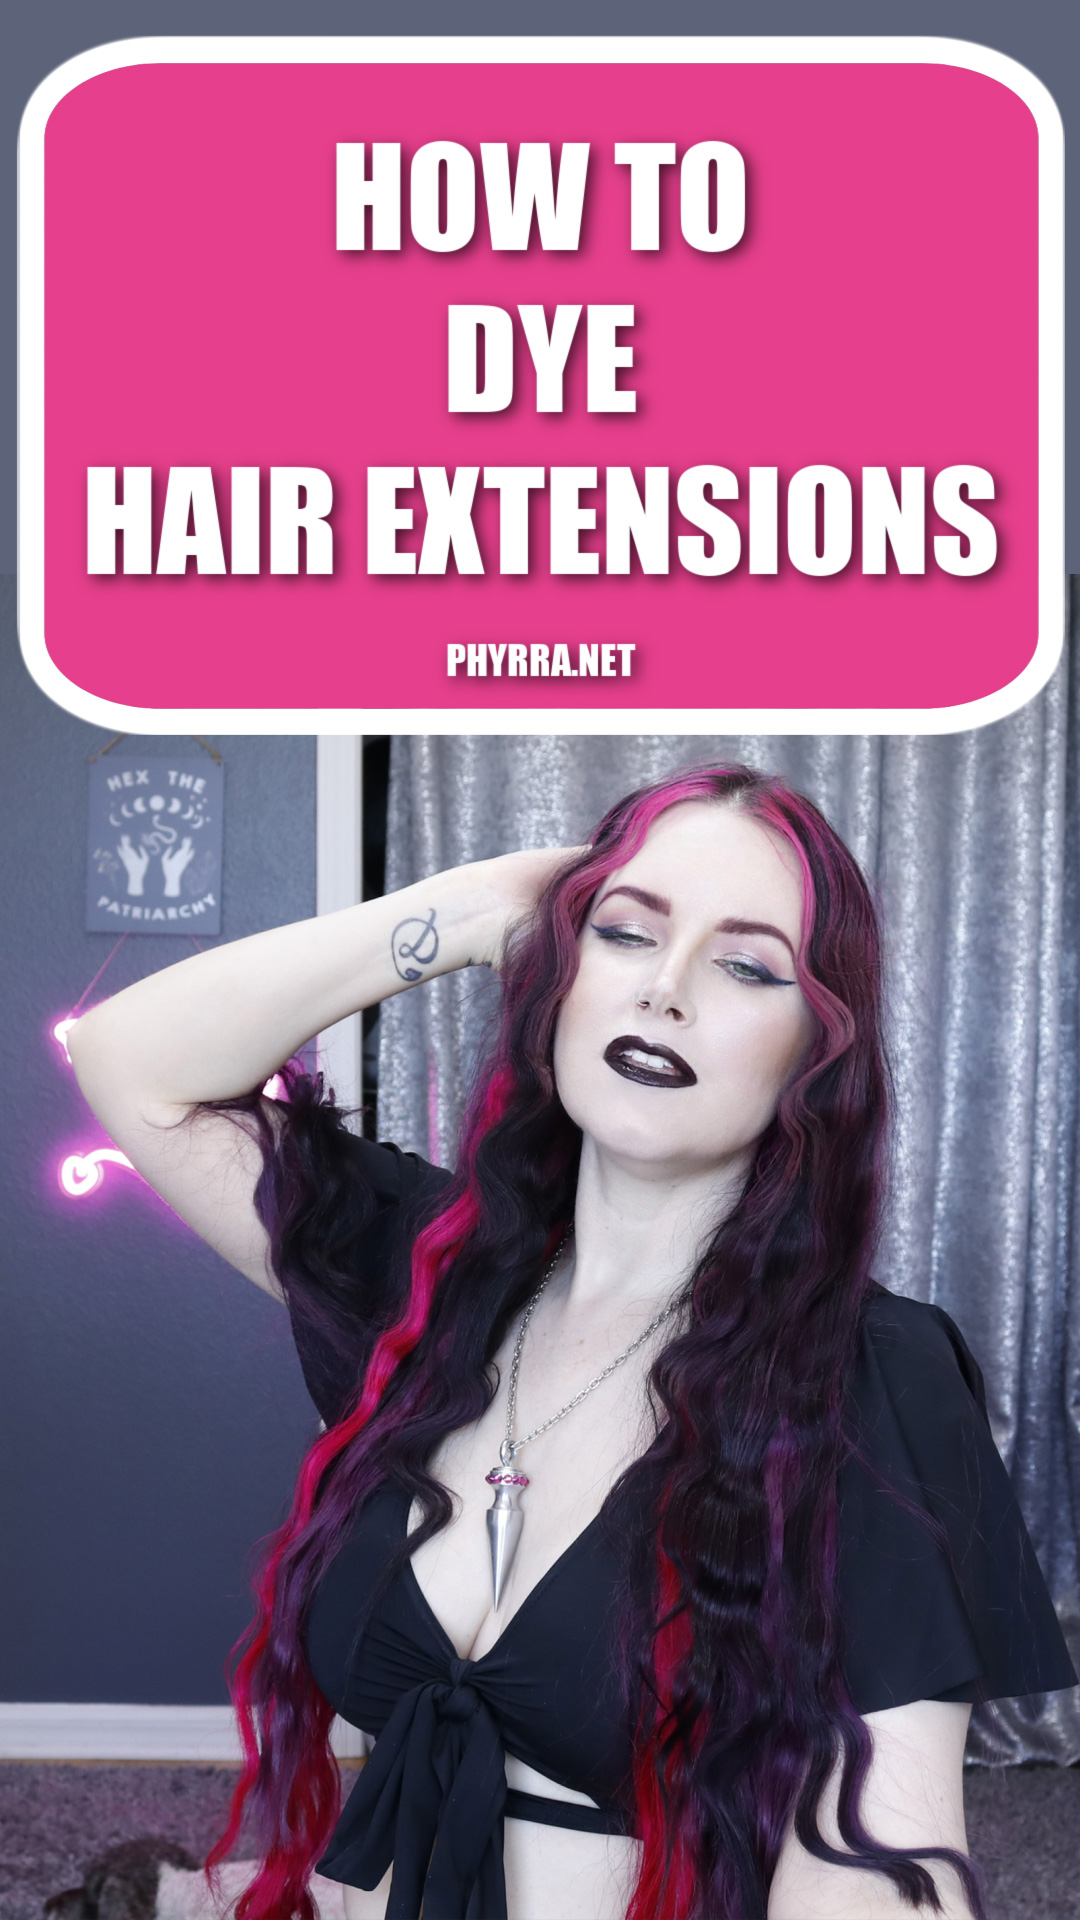 How to Dye Hair Extensions featuring Irresistible Me